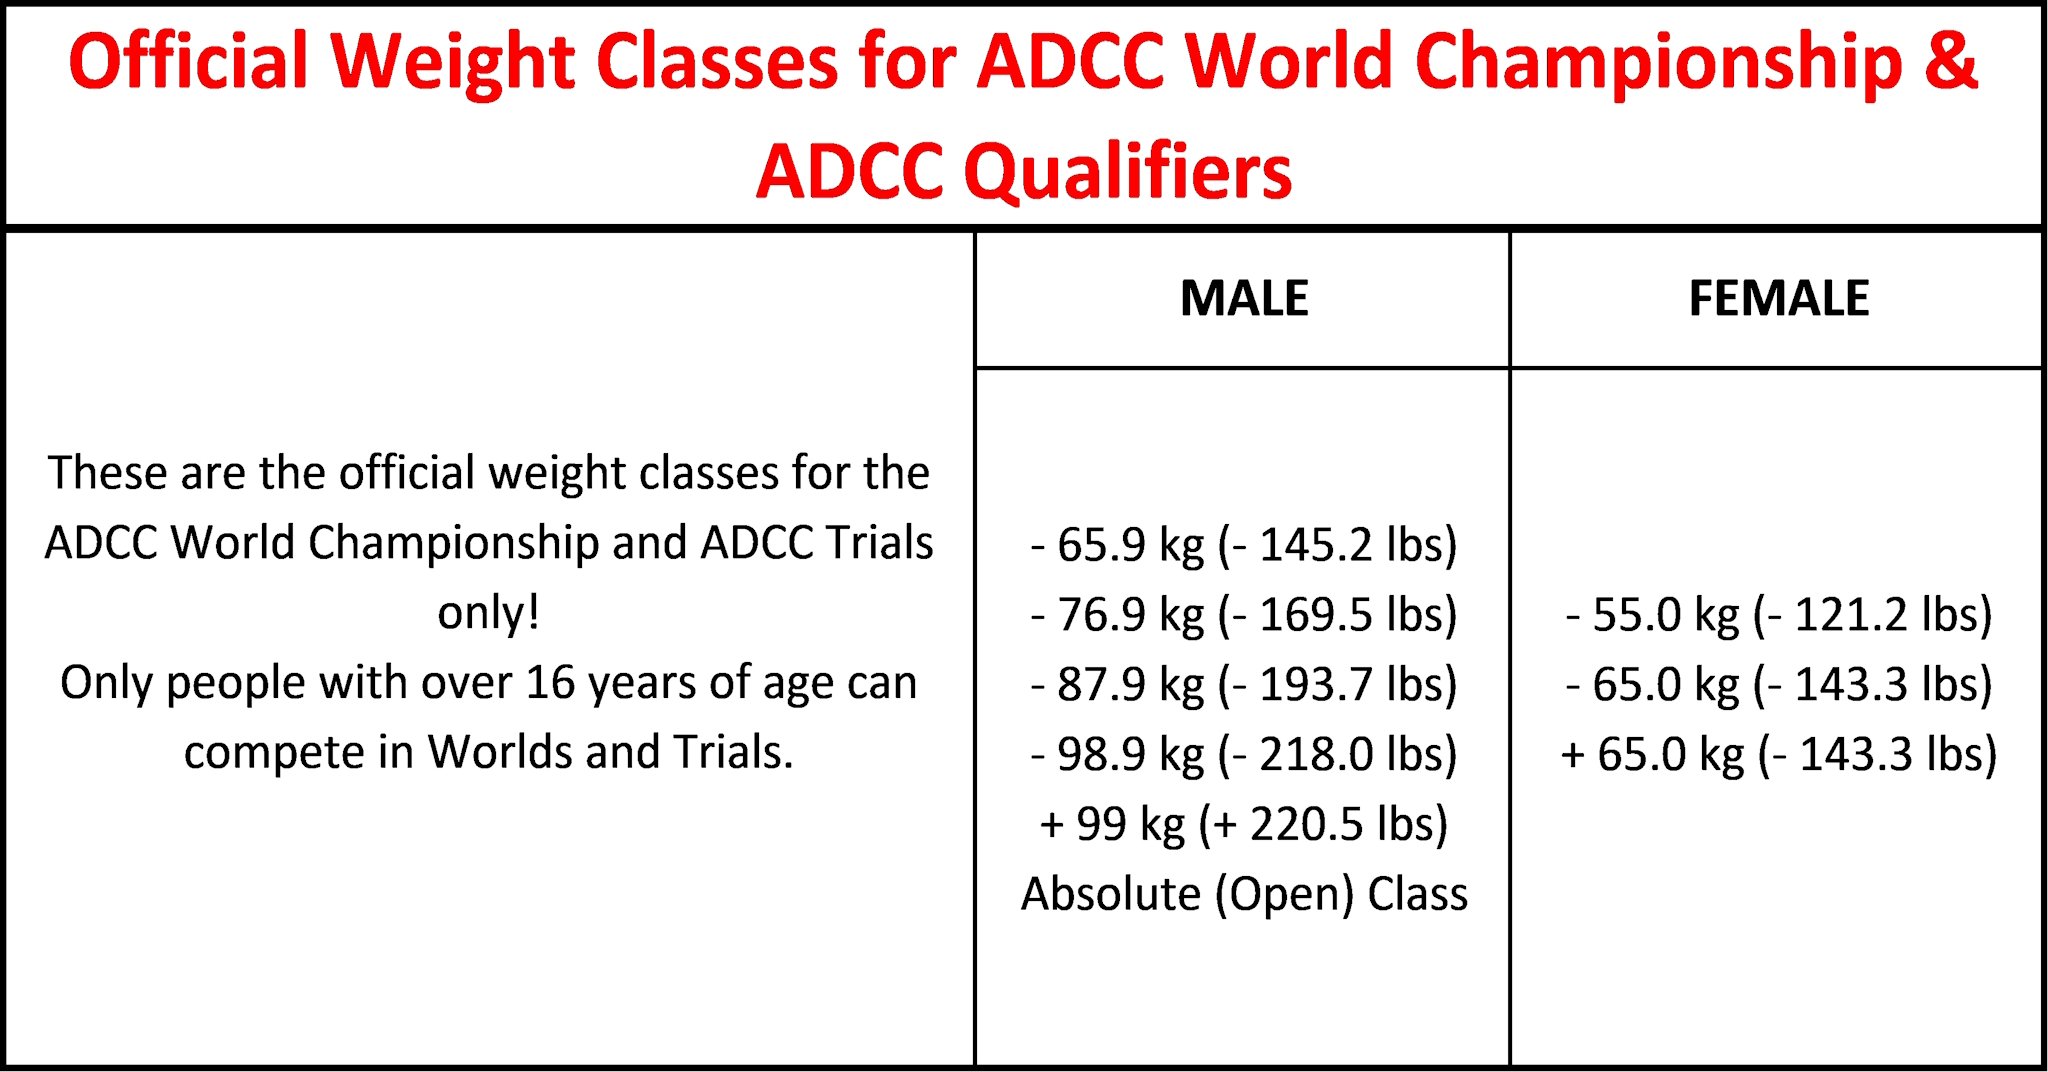 THE OFFICIAL ADCC WORLDS WEIGHT CLASSES